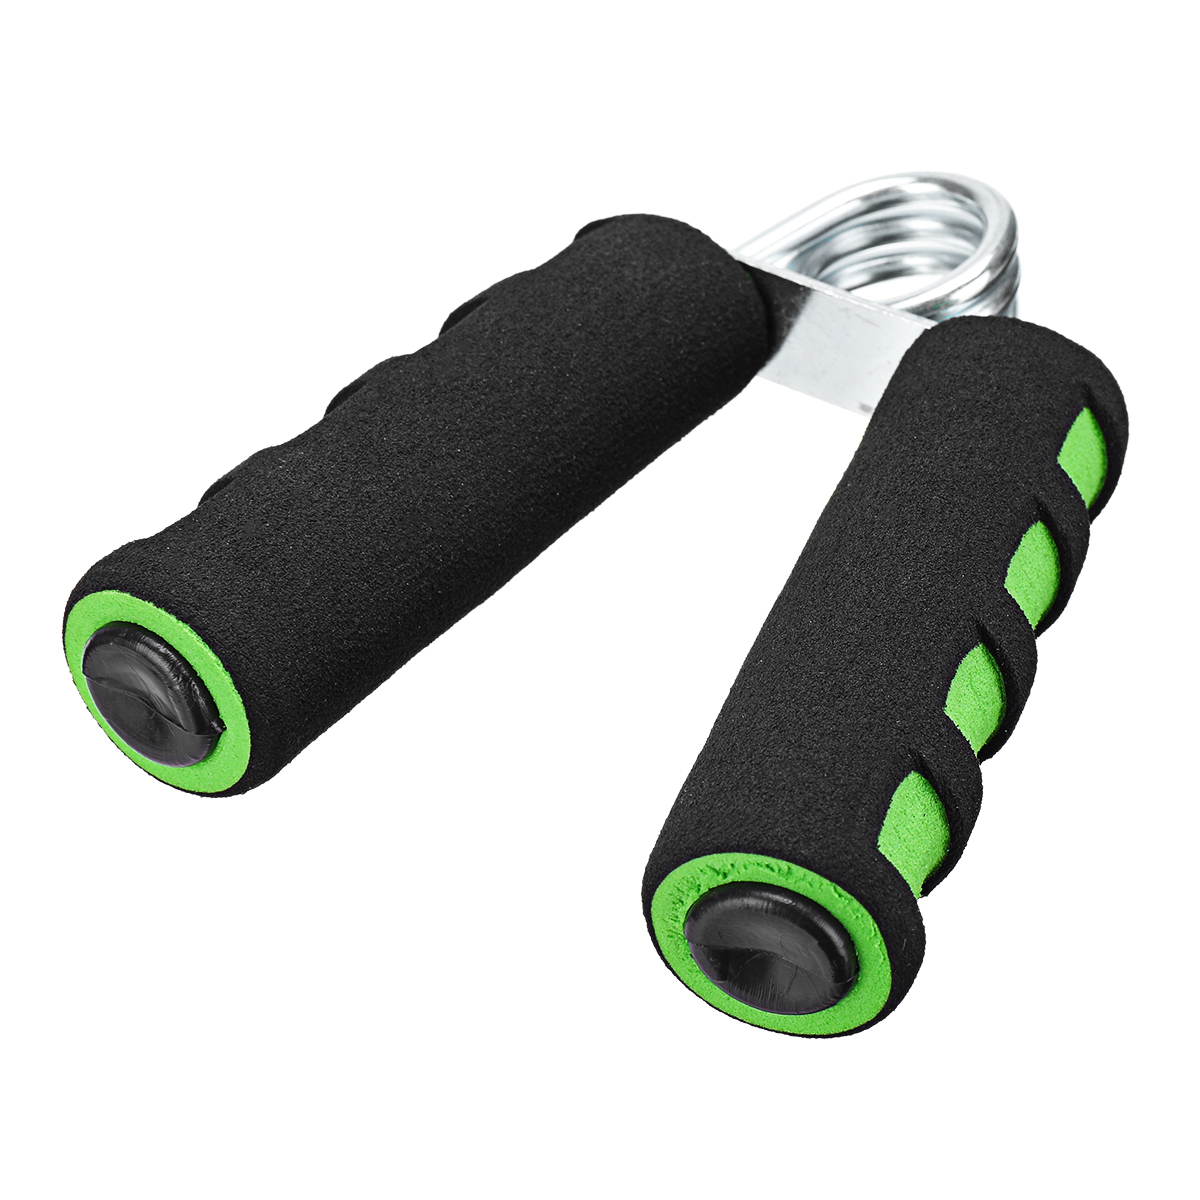 7-PcsSet-Ab-Rollers-Kit-Push-UP-Bar-Jump-Rope-Hand-Gripper-Knee-Pad-Resistance-Band-Exercise-Trainin-1810079-10